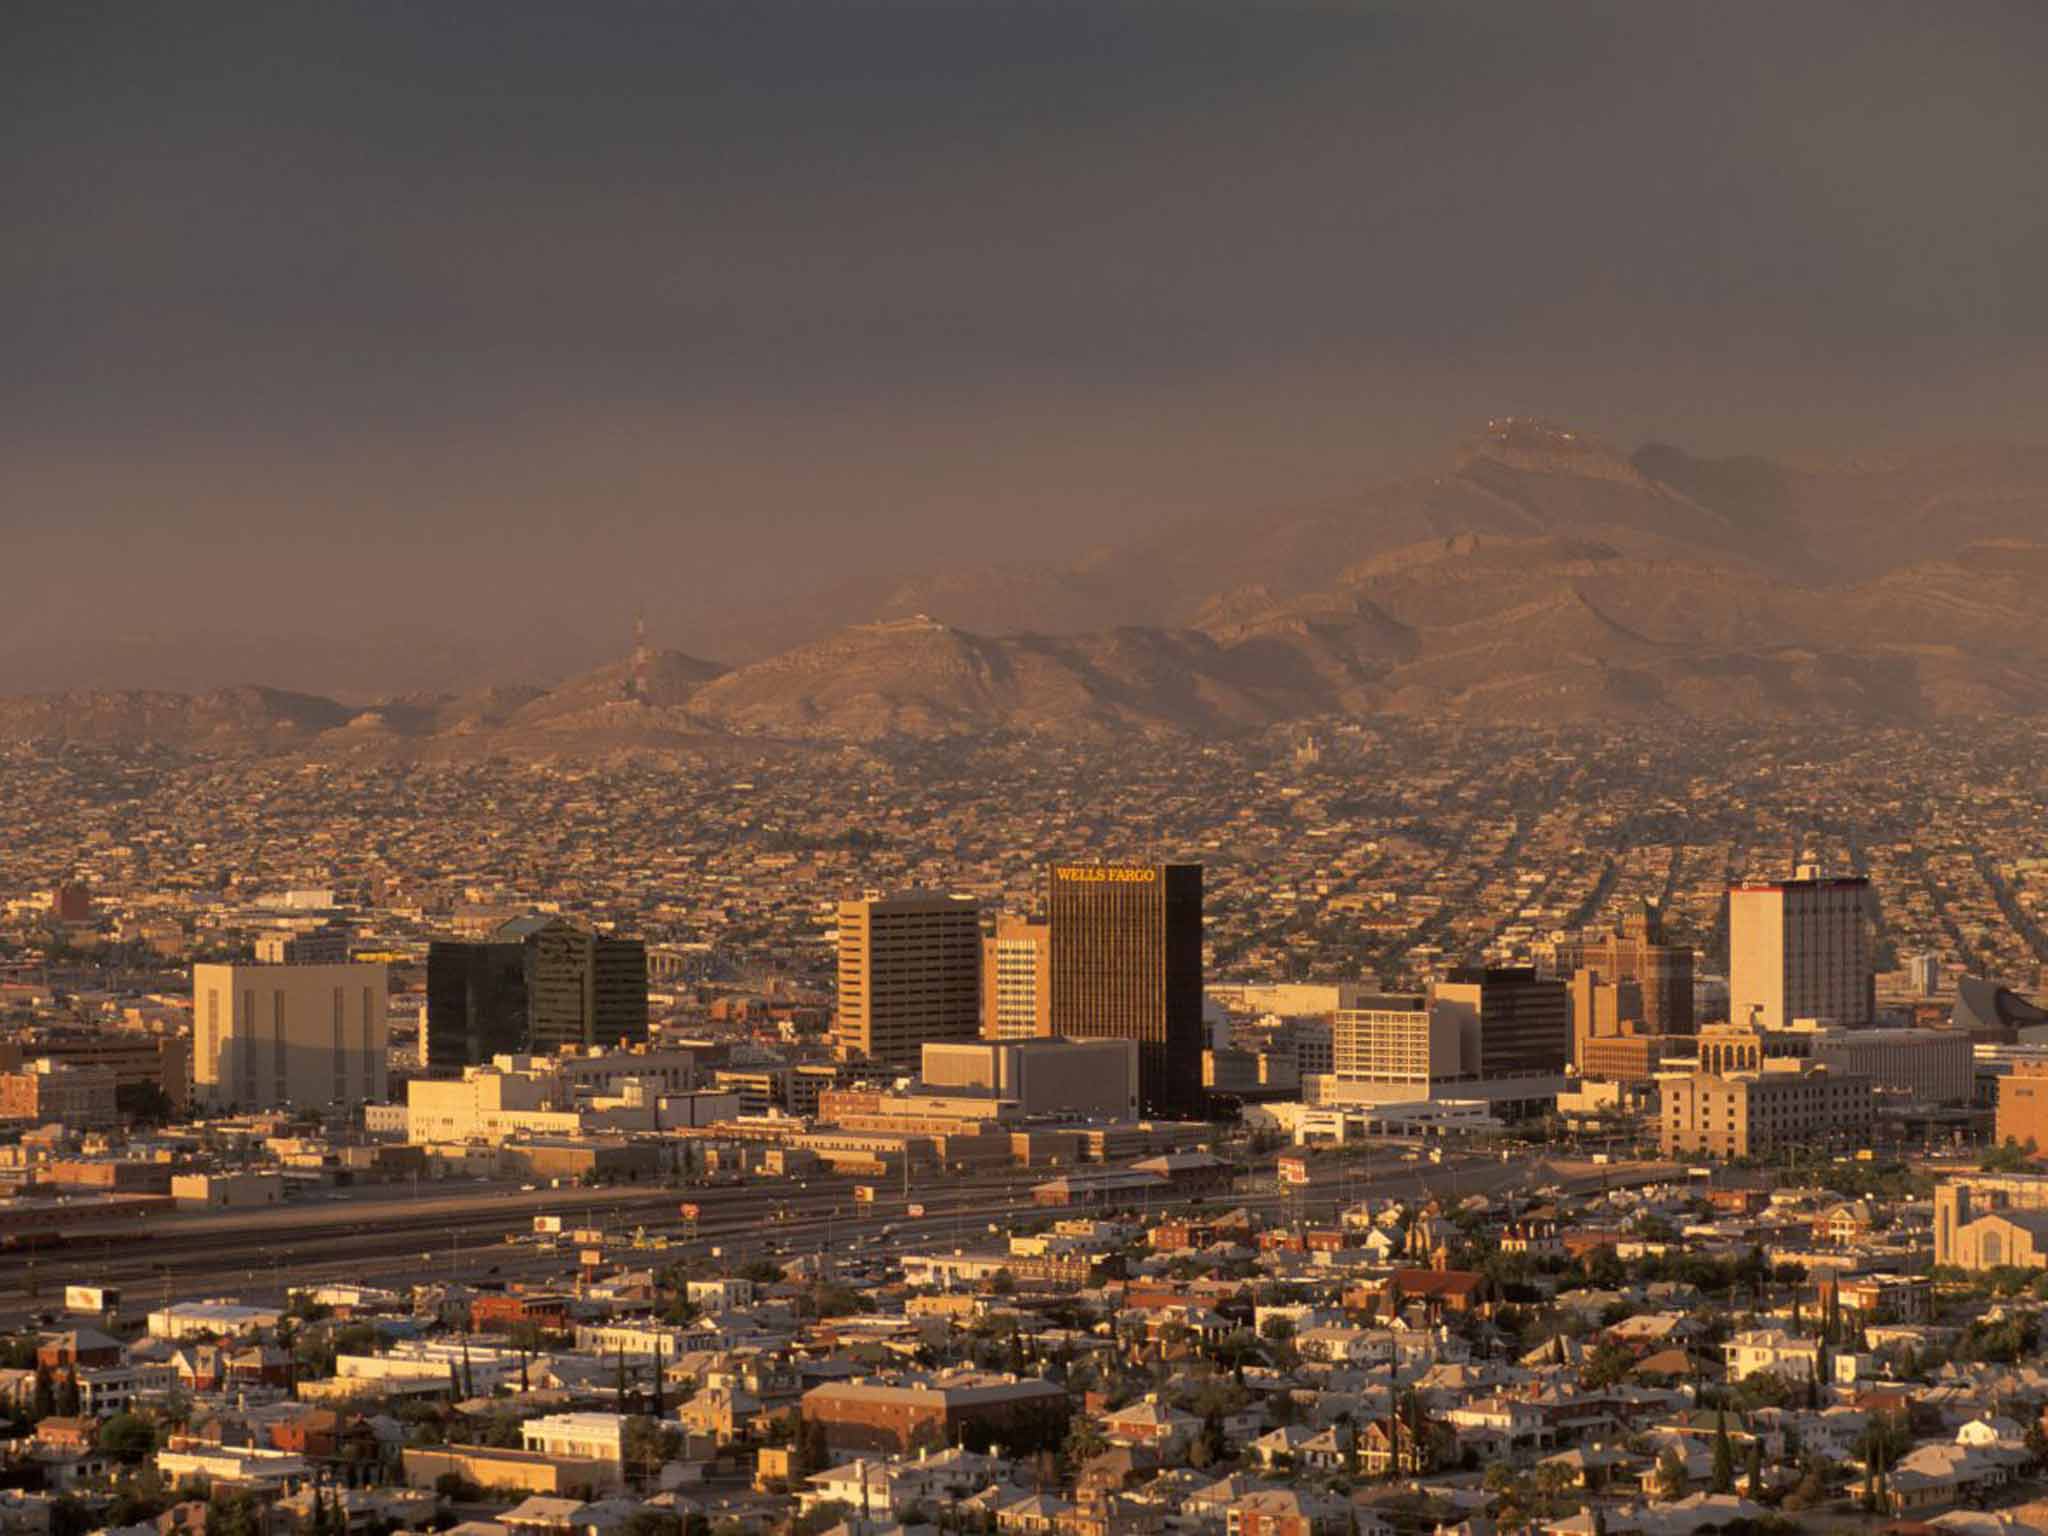 &#13;
Although within sight of Juarez, El Paso is one of the safest cities in the US &#13;